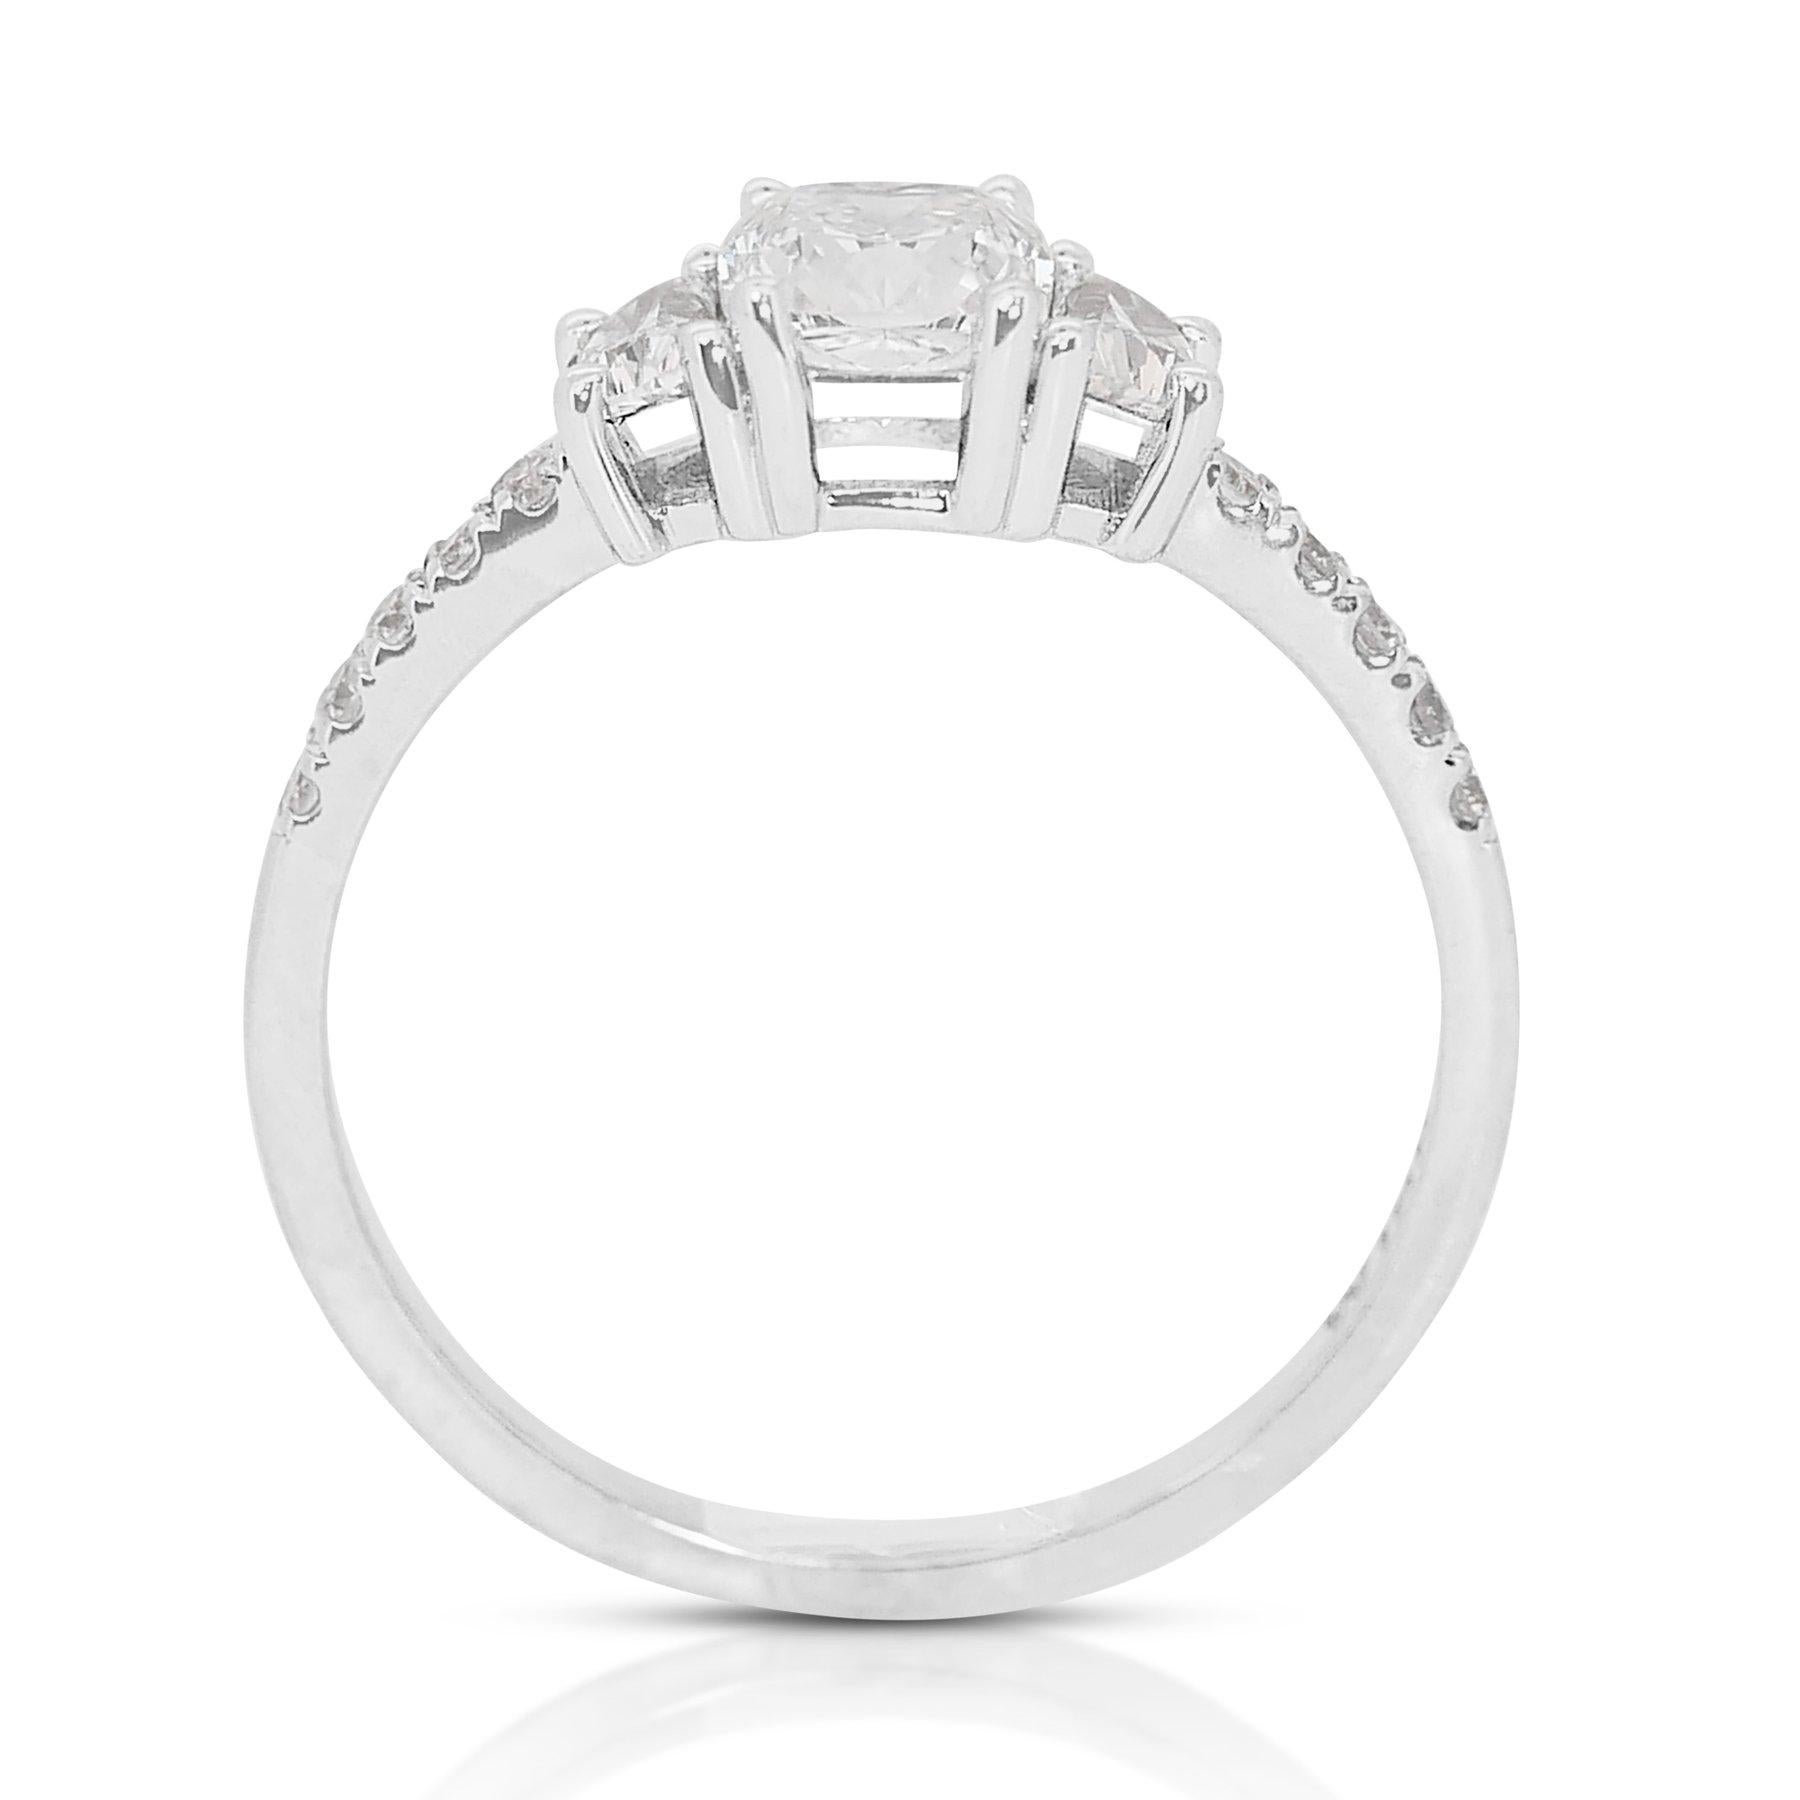 Luxurious 1.42ct Cushion Diamond Pave Ring in 18k White Gold - GIA Certified For Sale 1